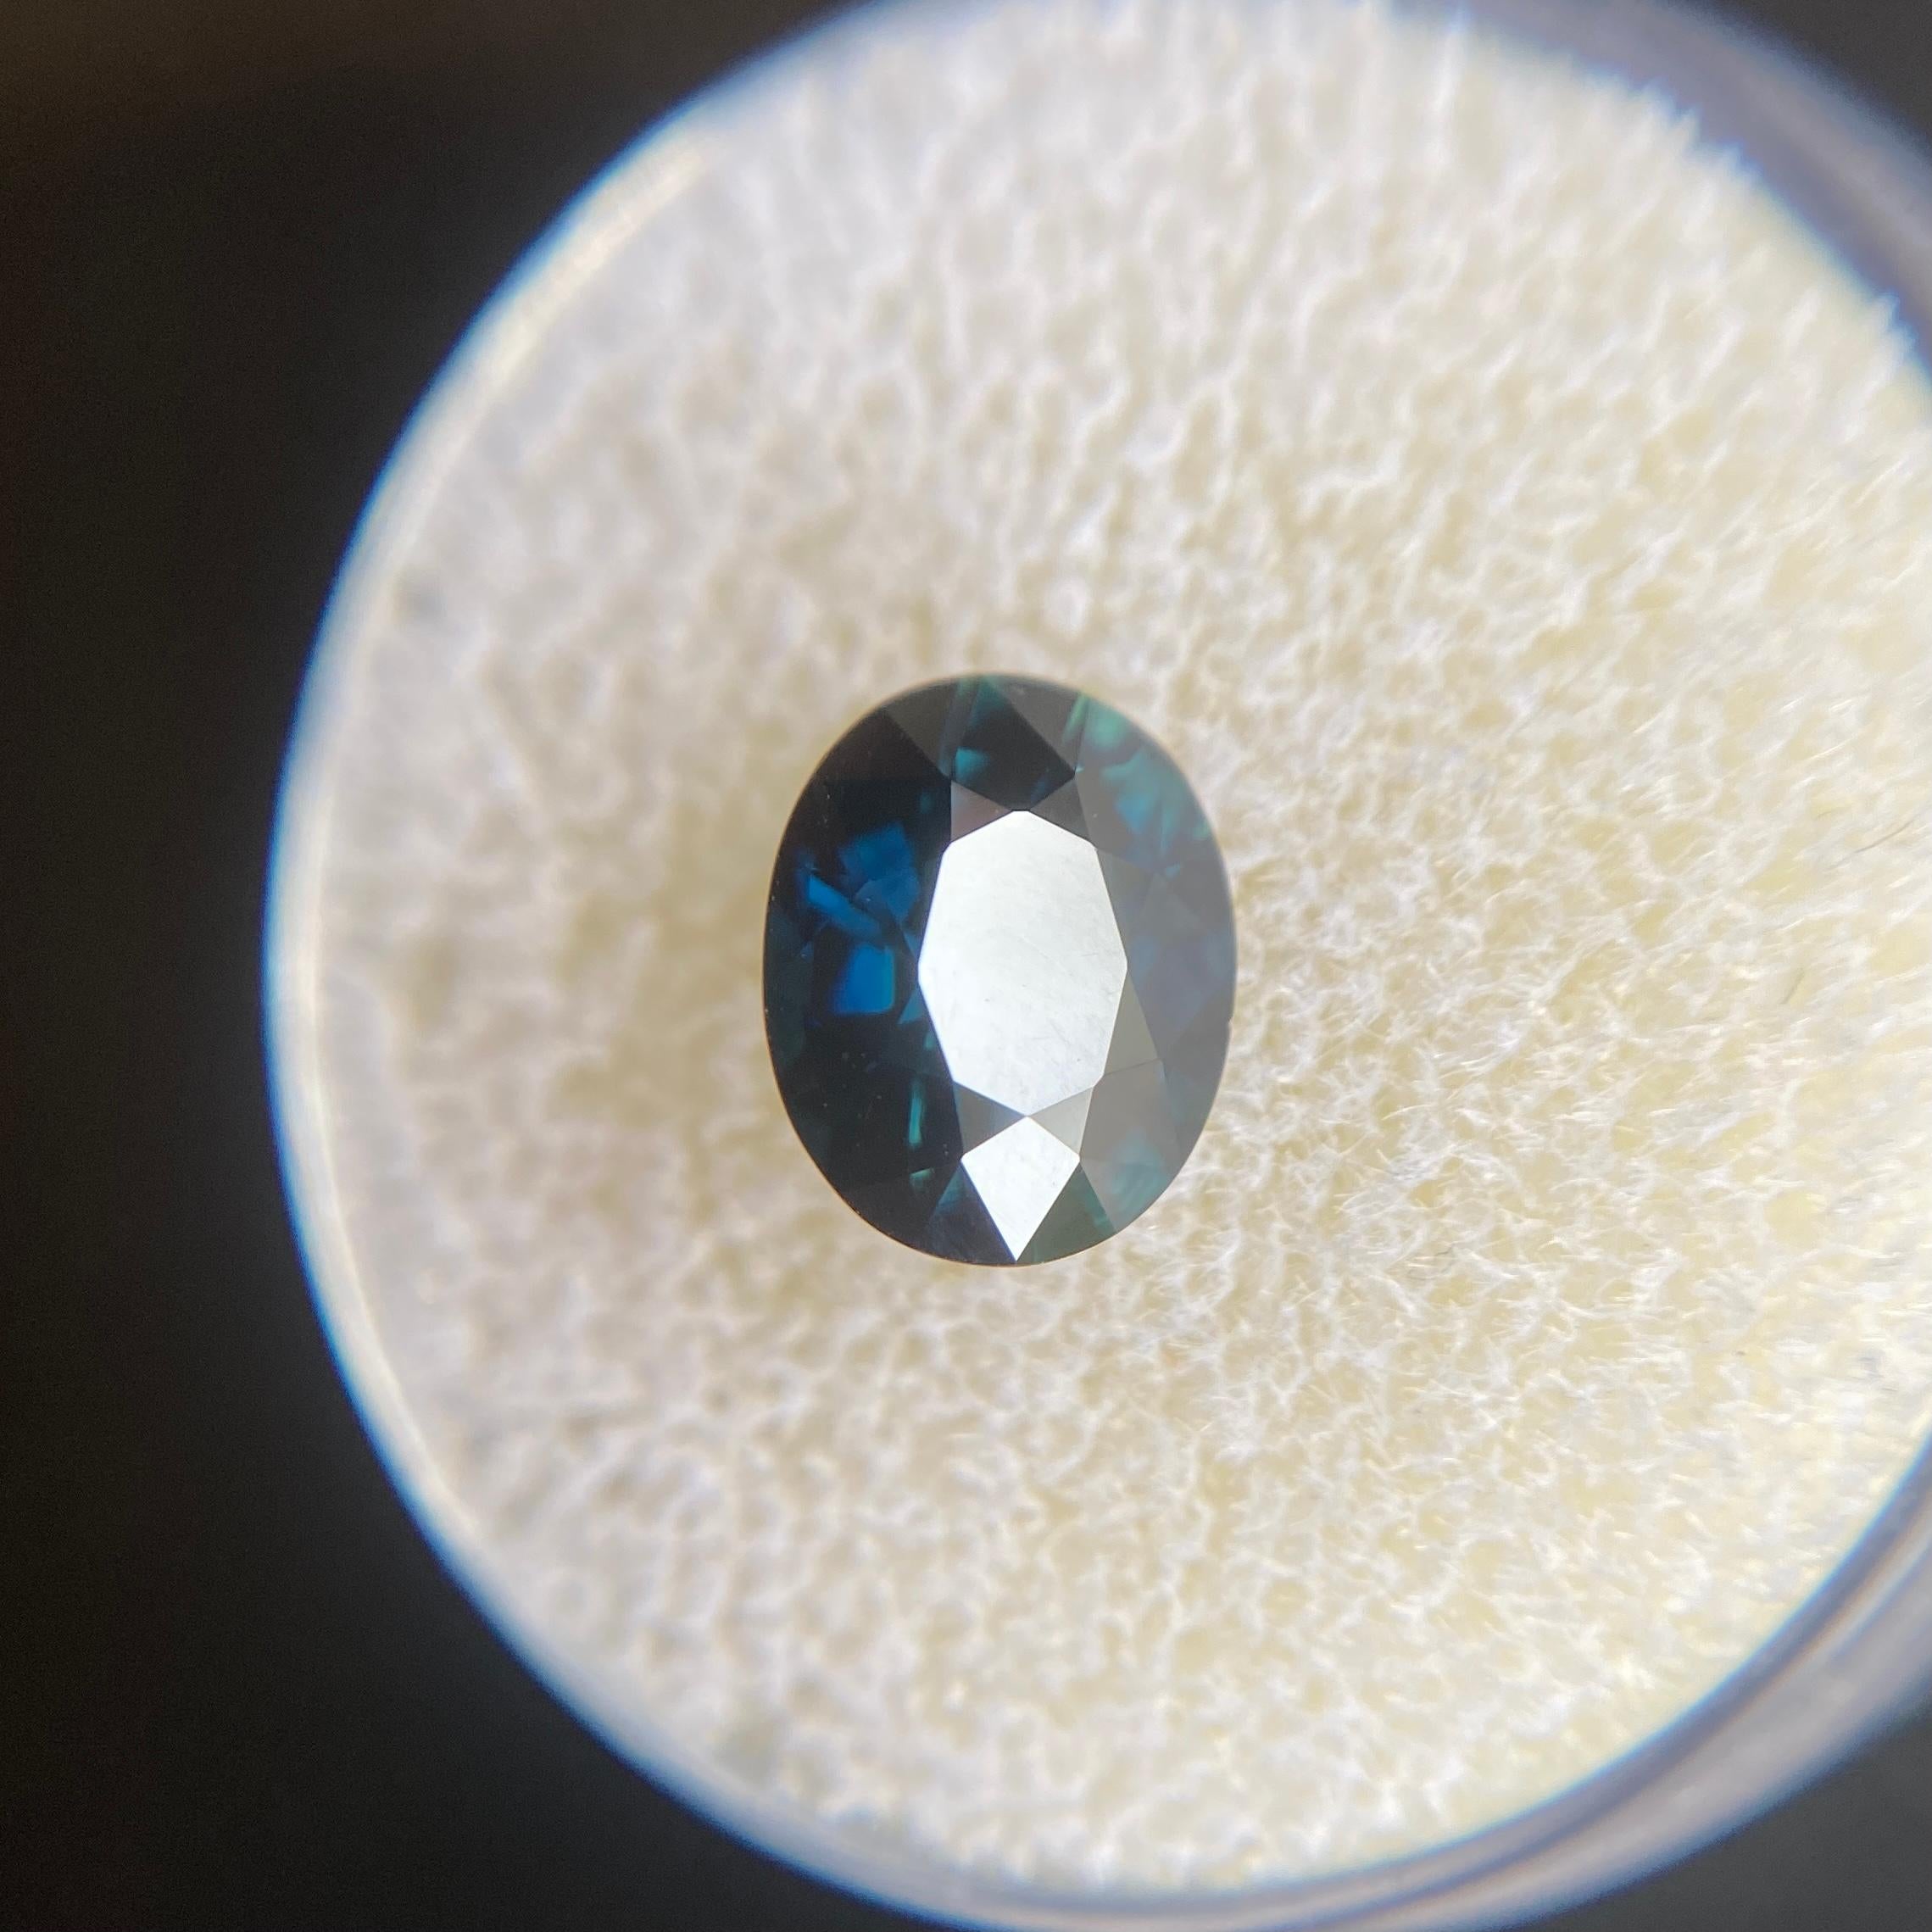 Natural Deep Blue Sapphire Gemstone.

2.16 Carat with a beautiful and deep blue colour and very good clarity, a clean stone with only some small natural inclusions visible when looking closely. Also has an excellent oval cut and good polish to show